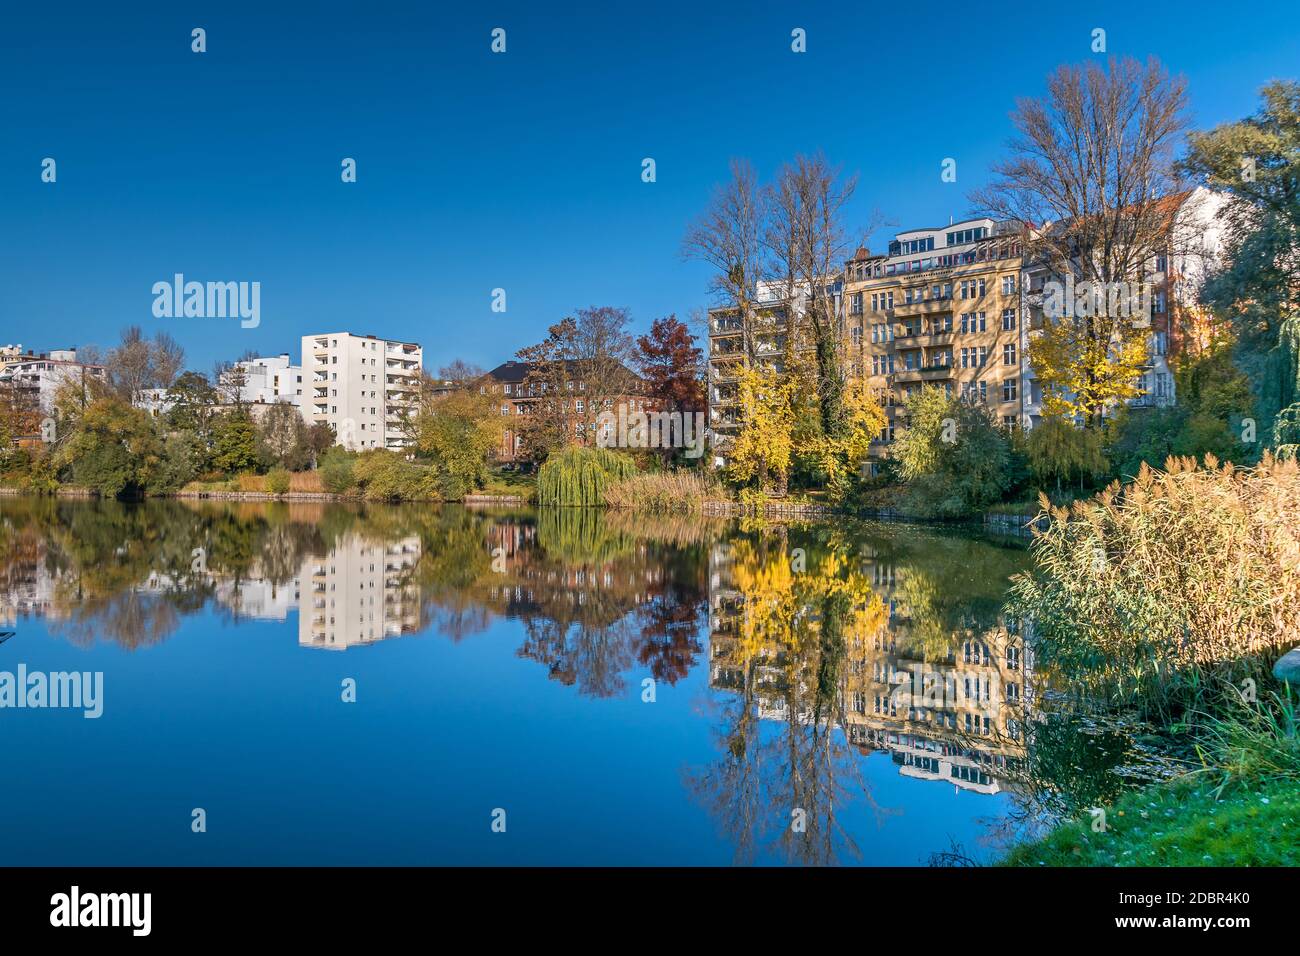 Park and a listed garden Lietzensee and buildings on the shore of Lake Lietzen (Lietzenseeufer) with its facades reflecting in the water Stock Photo